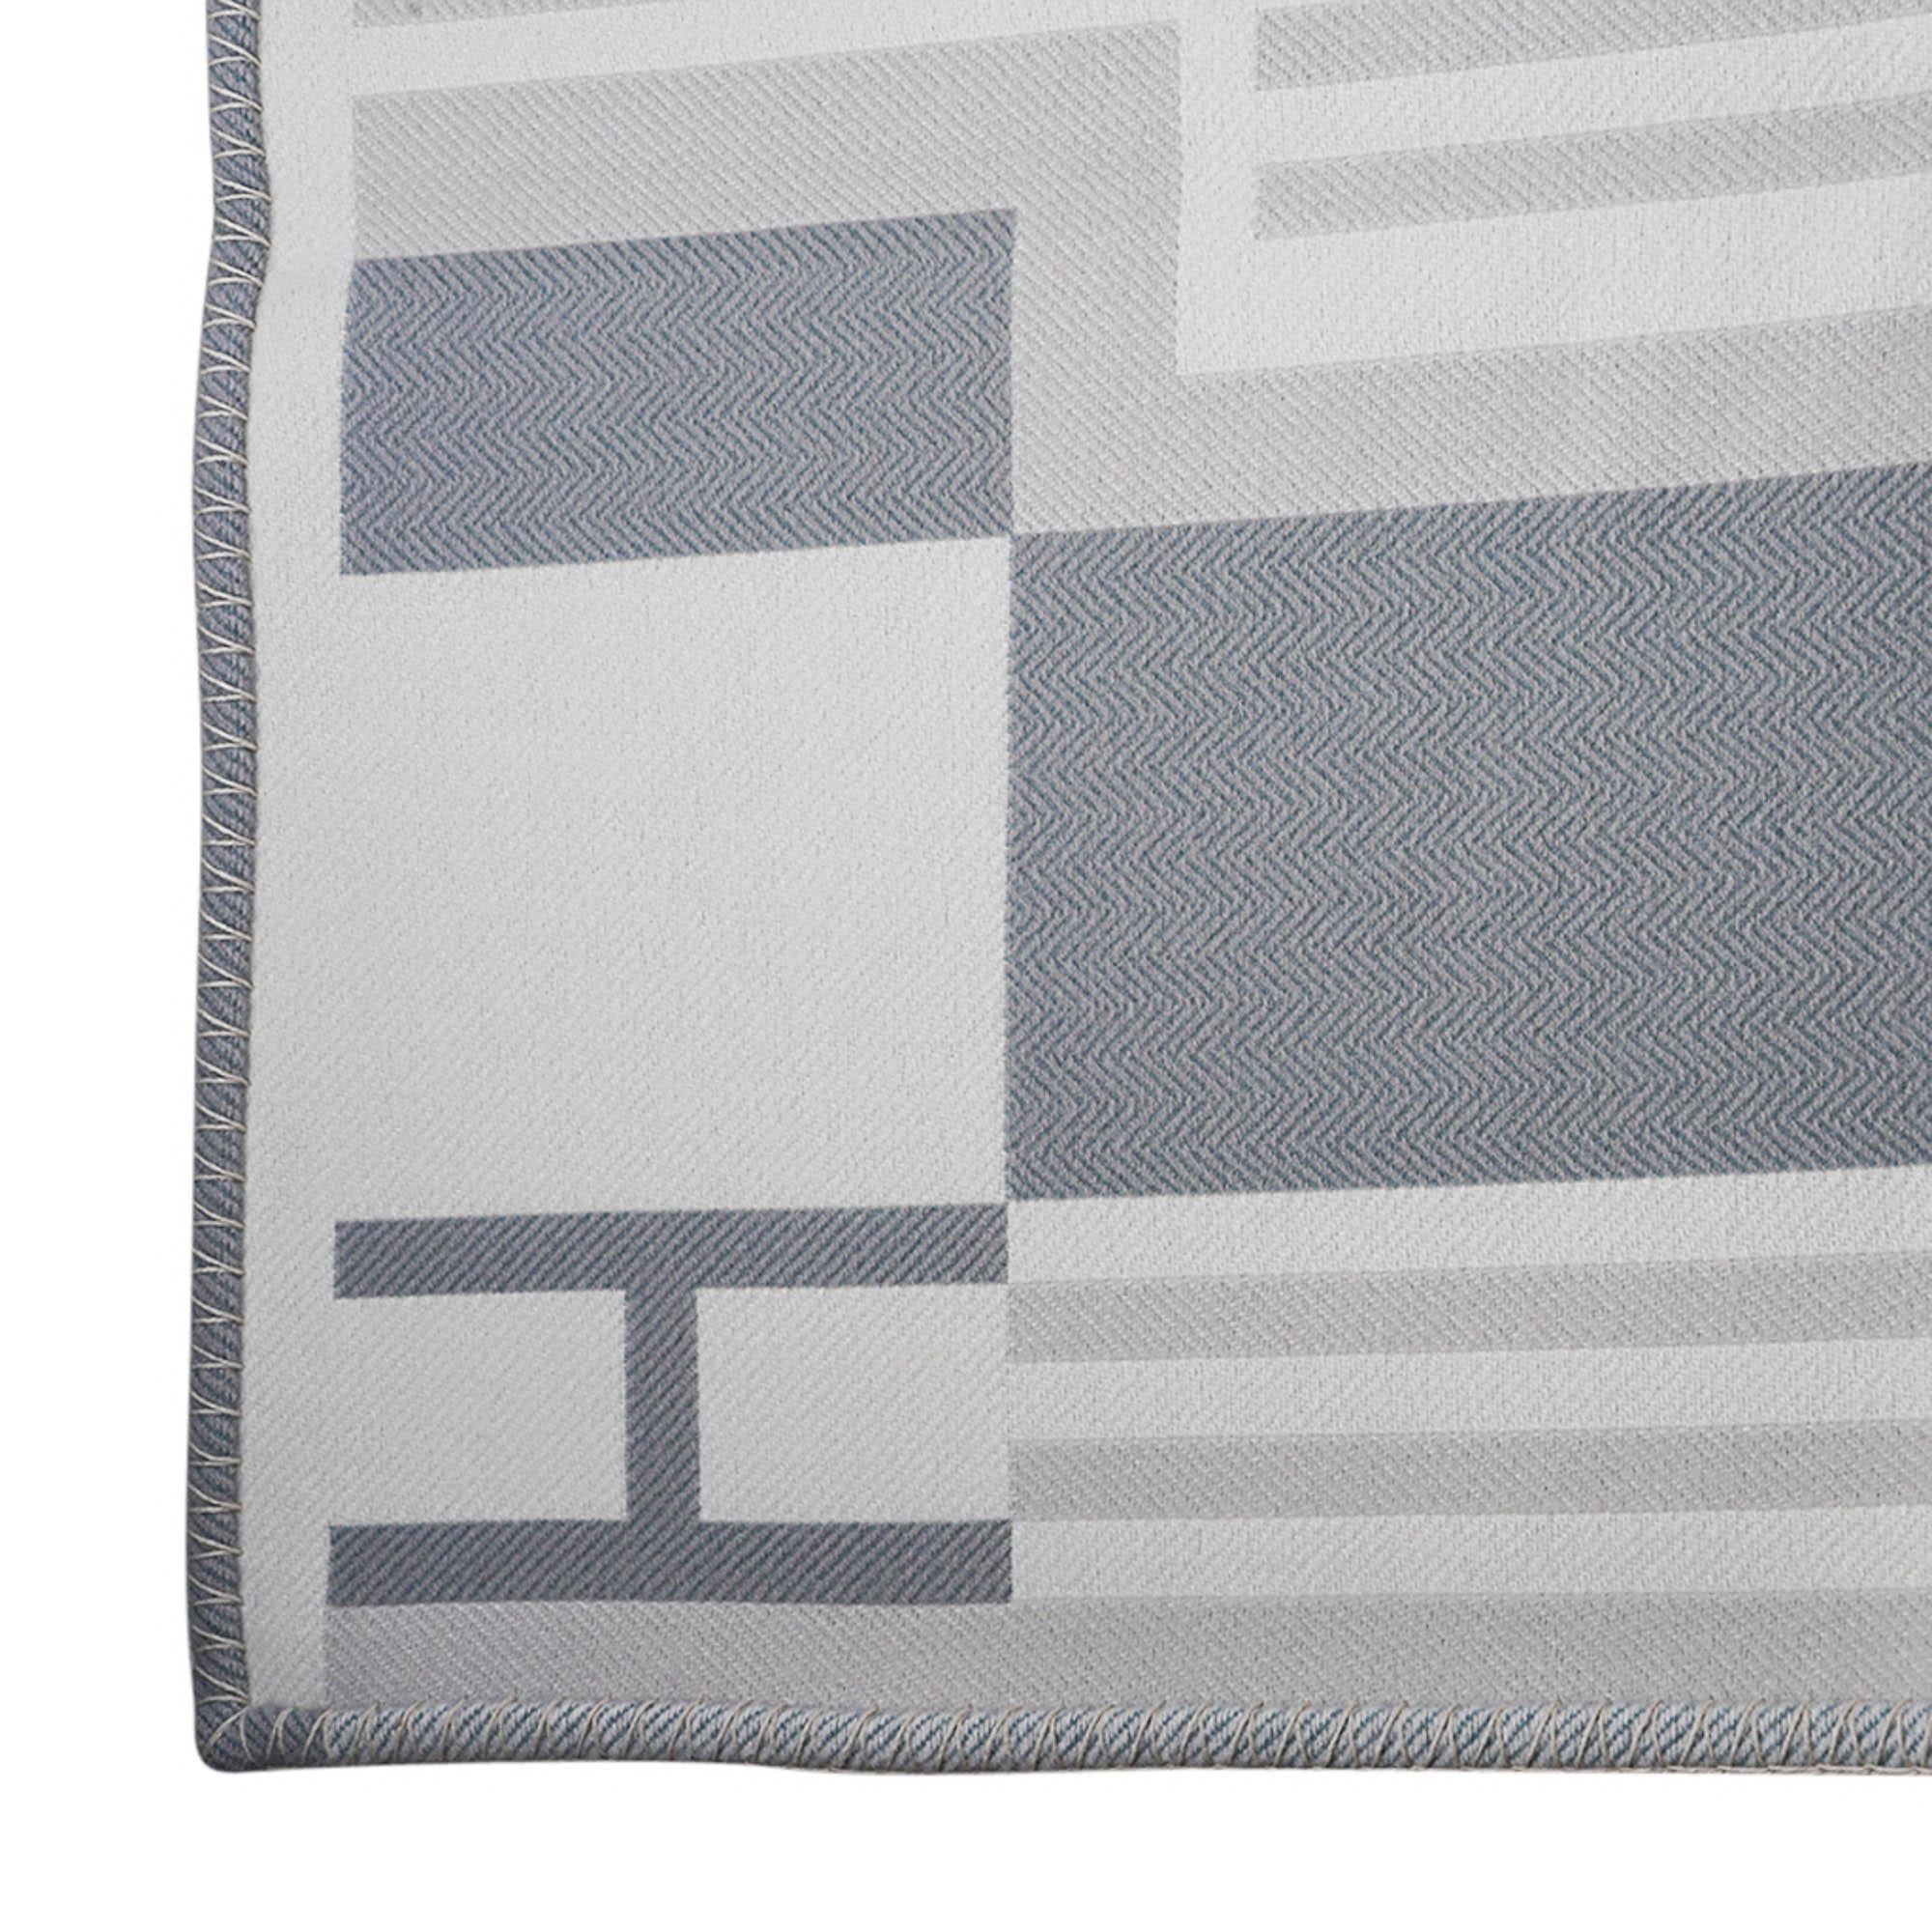 Hermes Ithaque Blanket Gris Perle Wool and Cashmere For Sale 3